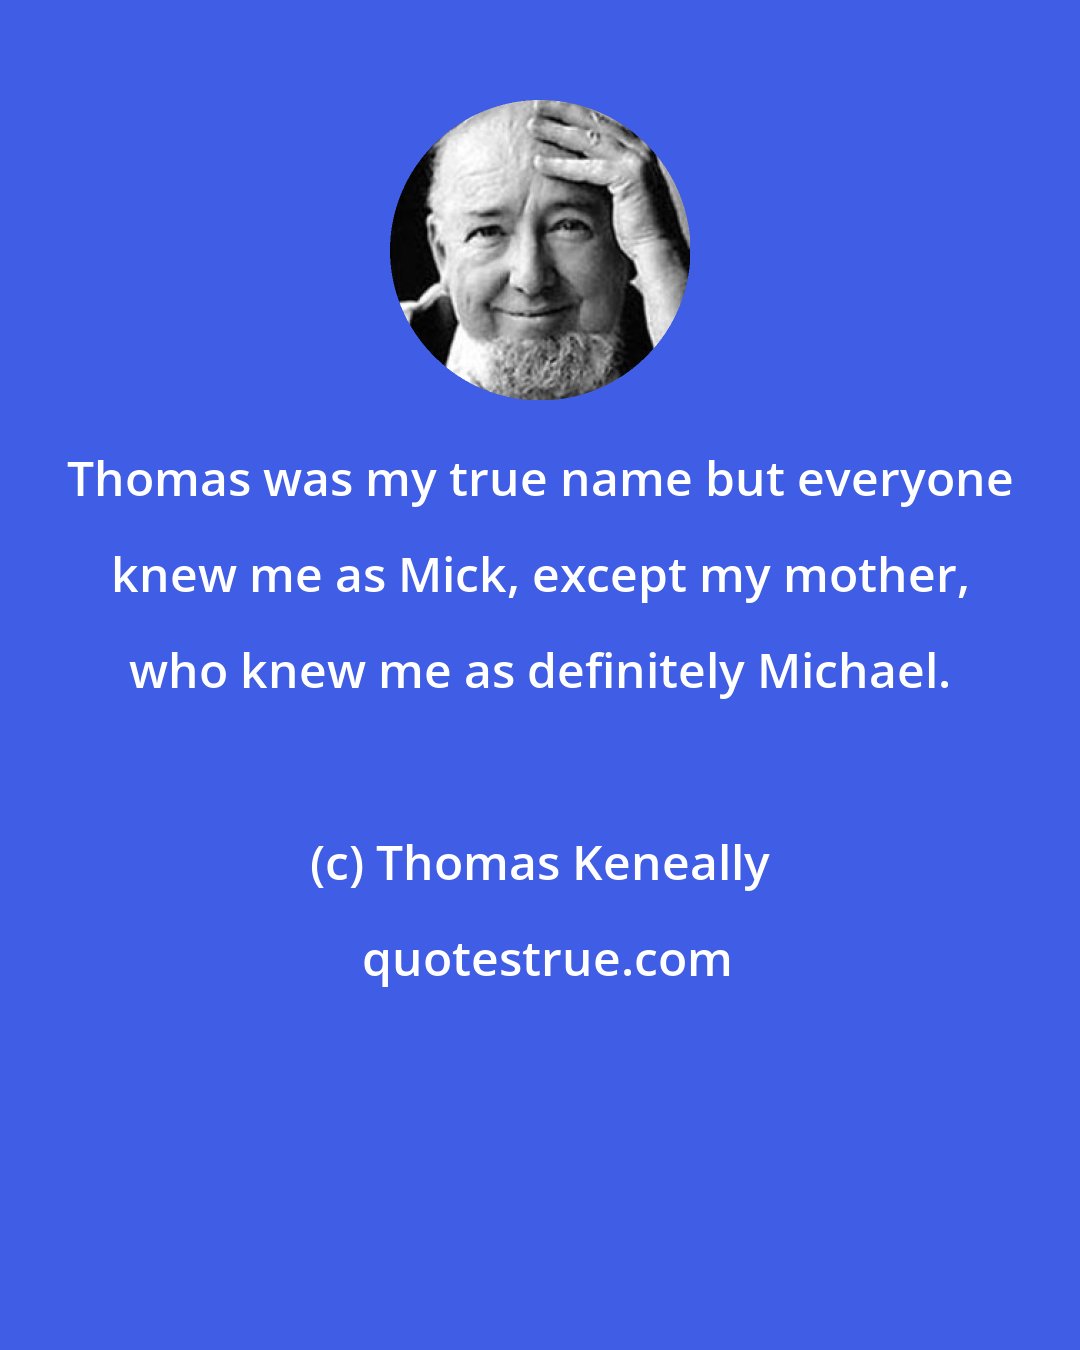 Thomas Keneally: Thomas was my true name but everyone knew me as Mick, except my mother, who knew me as definitely Michael.